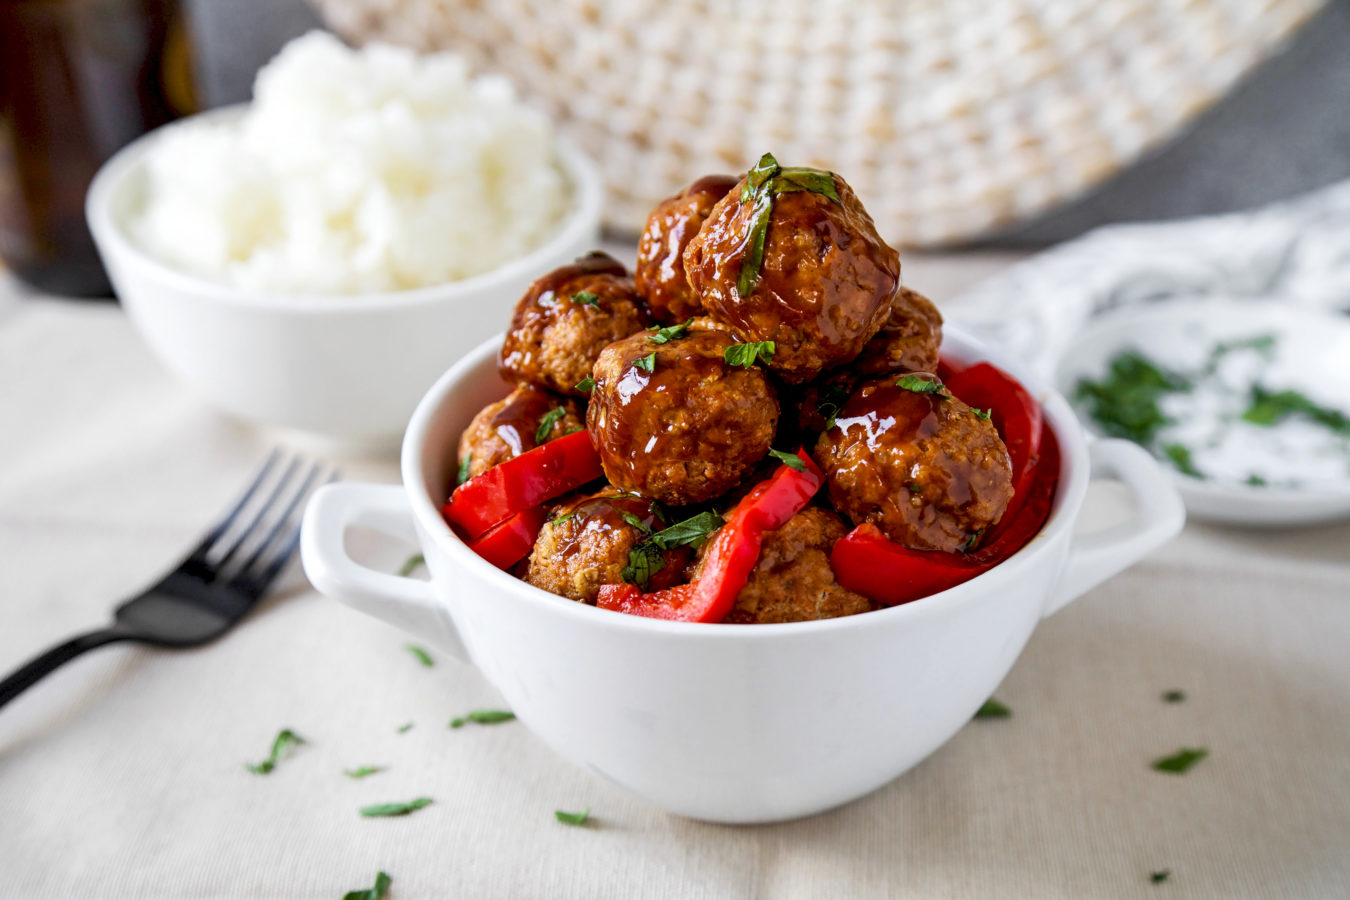 Cajun turkey meatballs - Loaded with a mixture of Cajun seasoning, oyster sauce and smoked paprika, this easy meatball recipe will become a favorite in your house! #turkeyrecipes #healthymeals #kidfriendly | Tiger USA